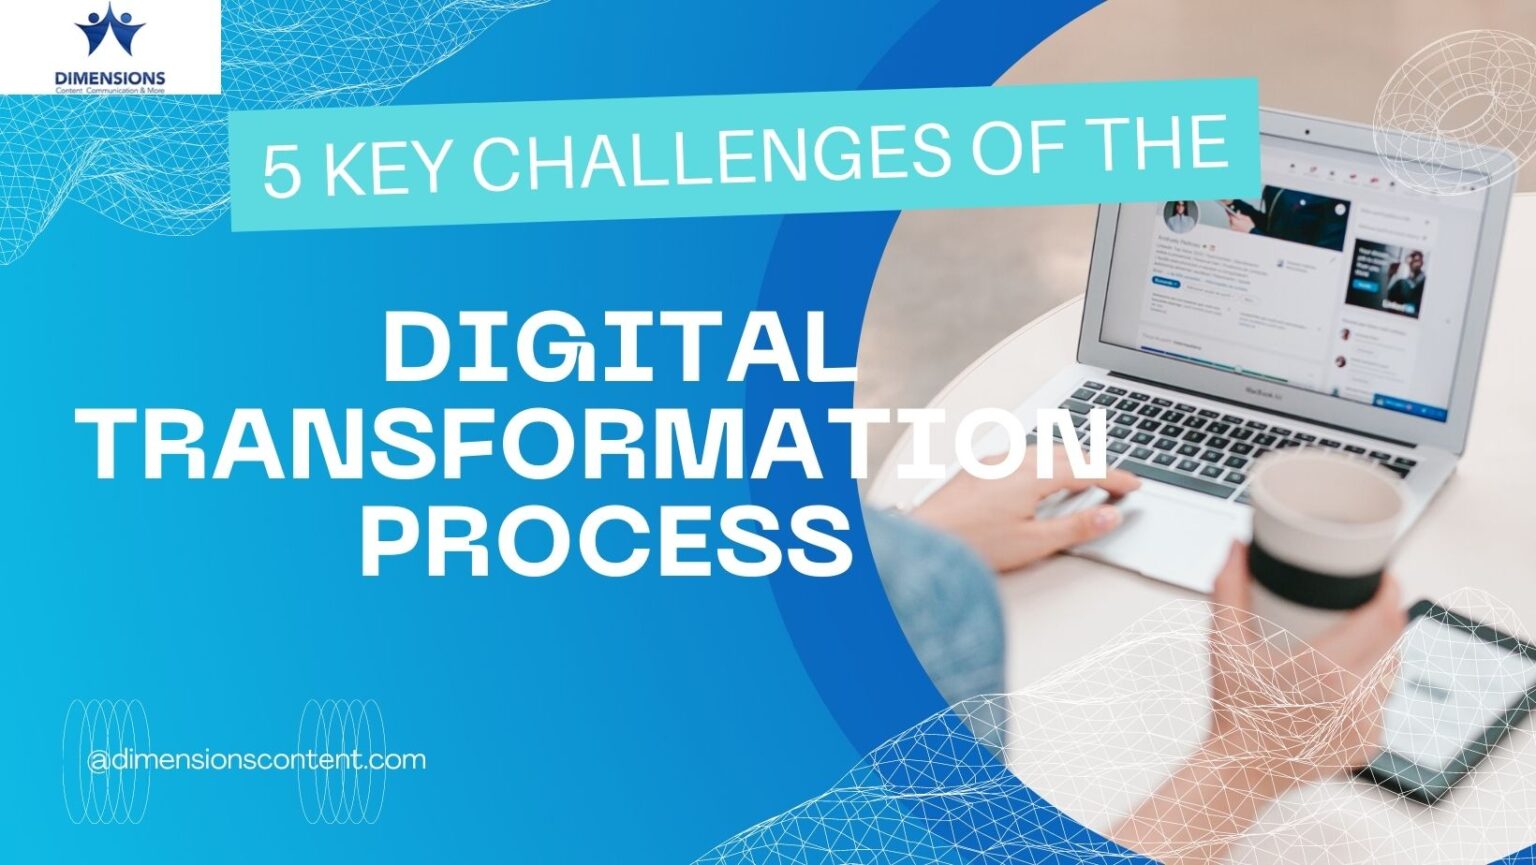 5 Key Challenges Of The Digital Transformation Process - Dimensions Content